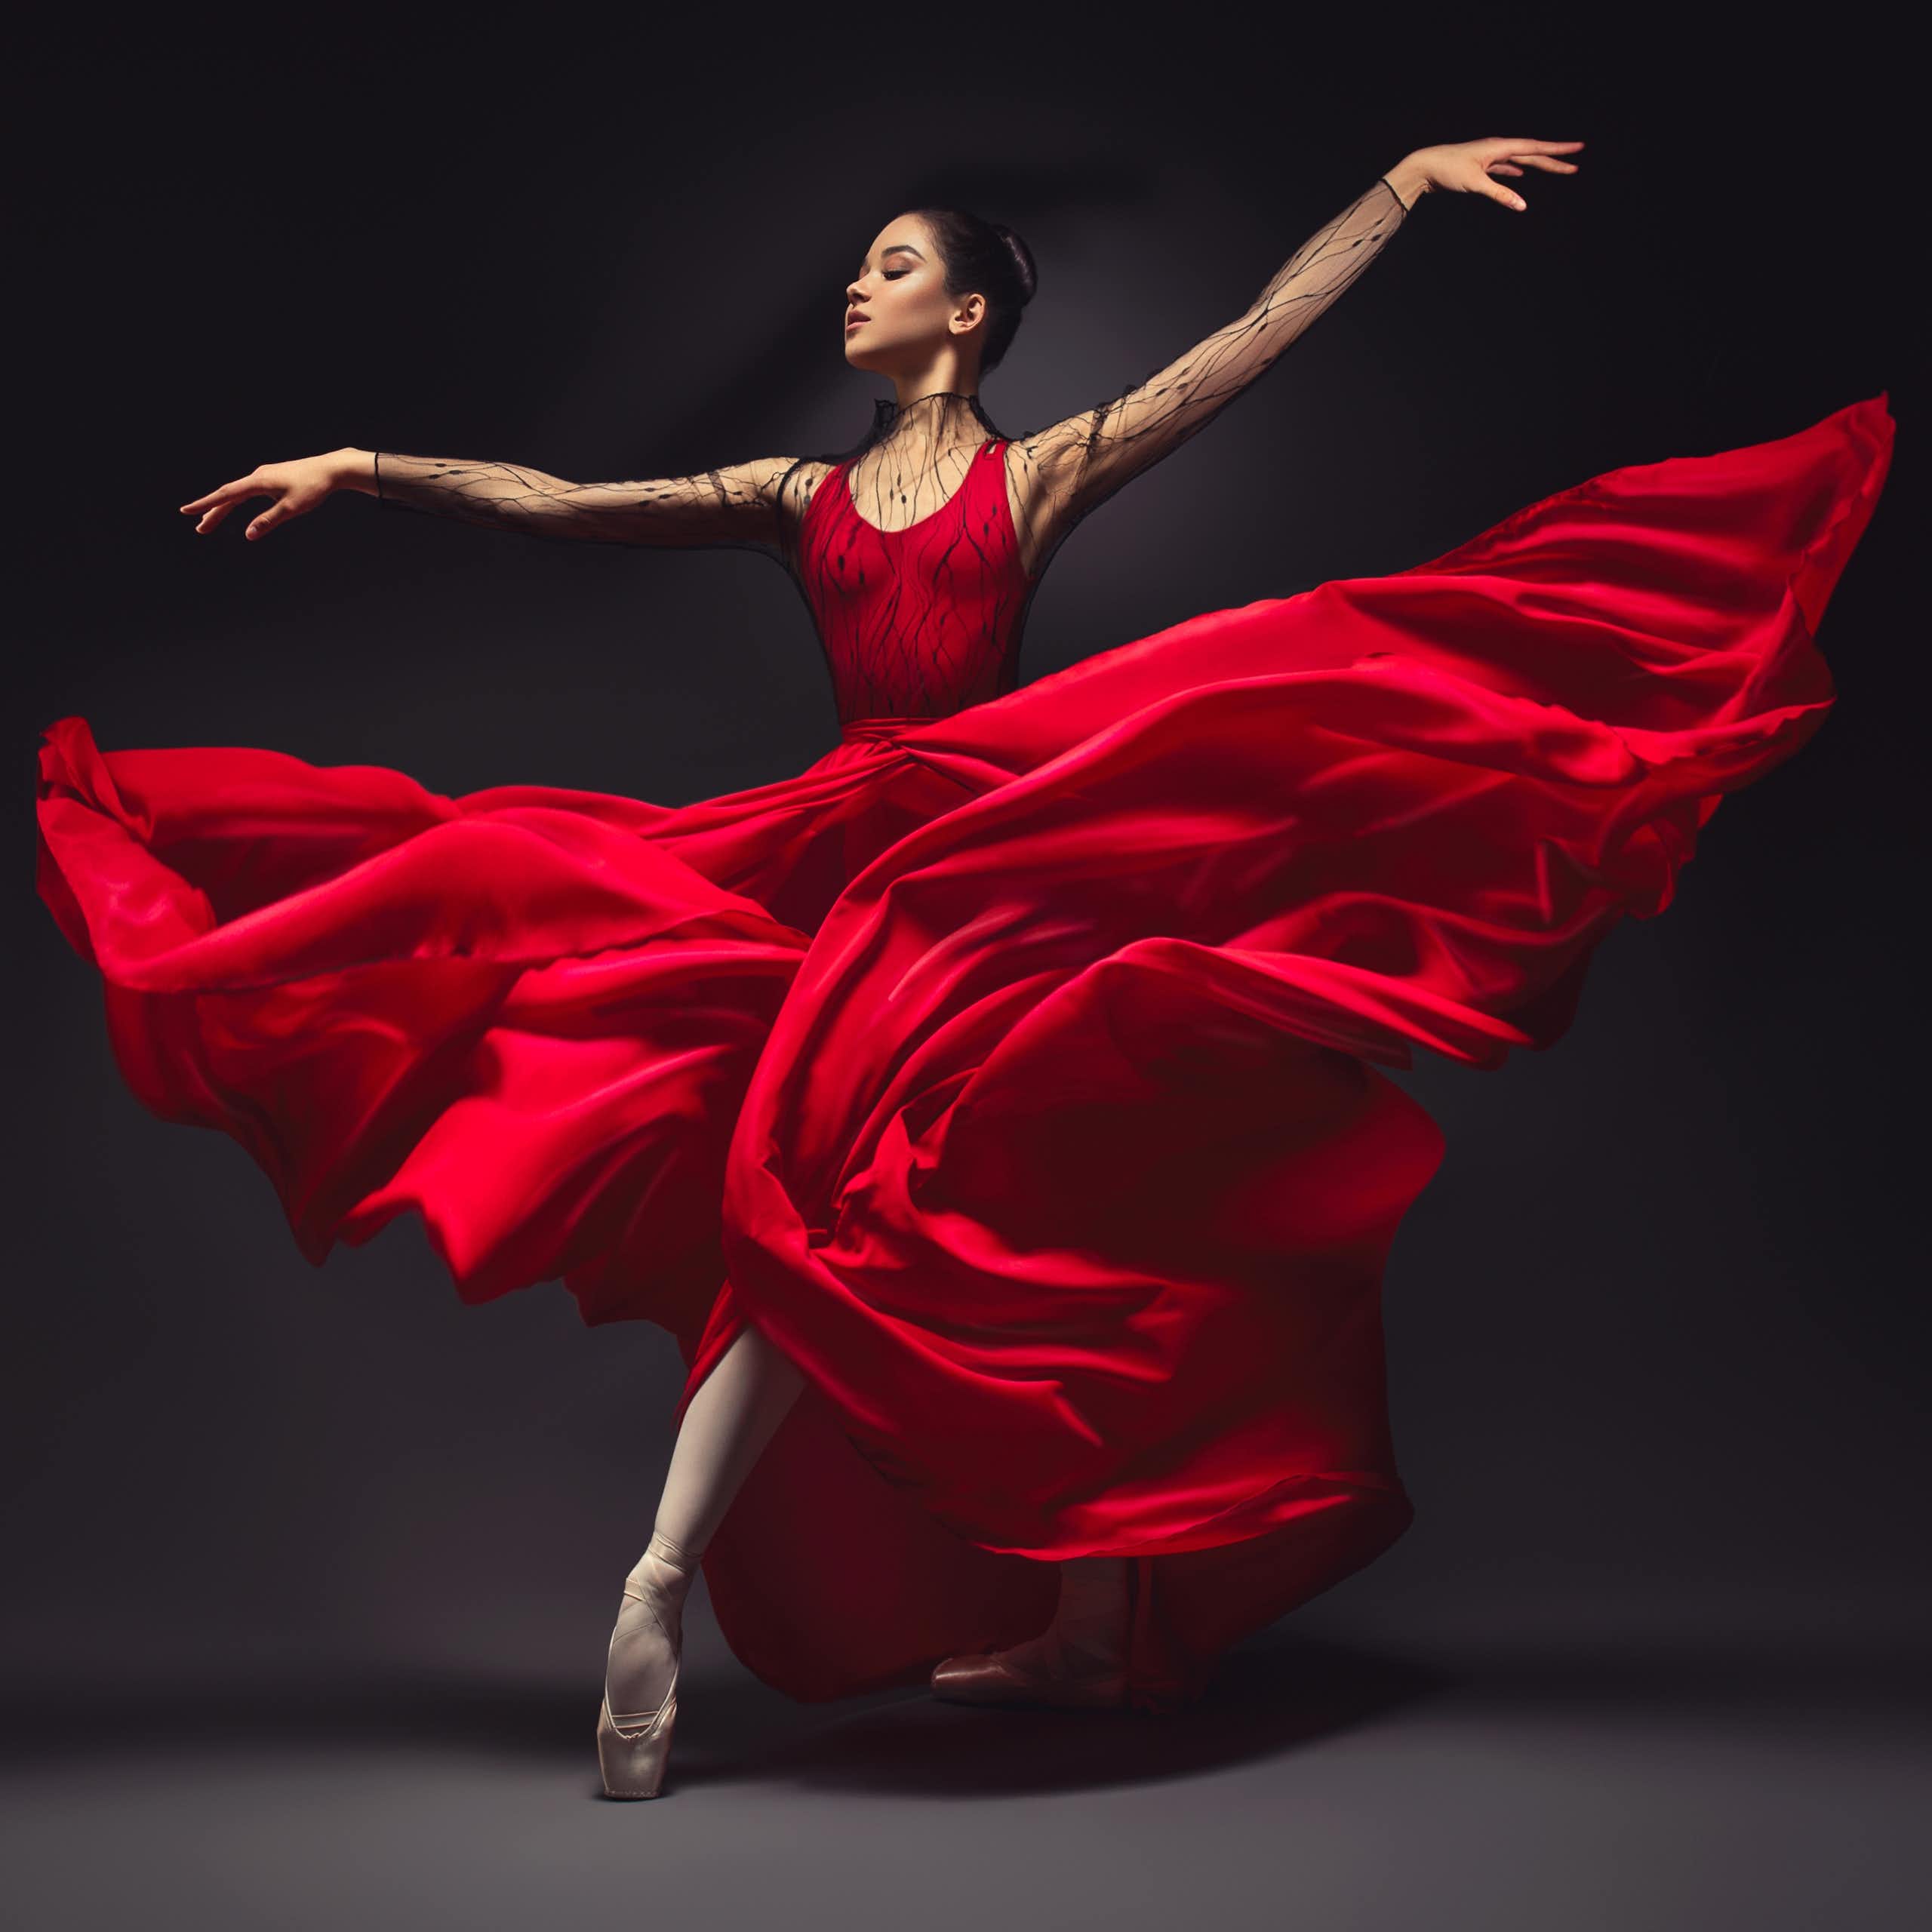 Young graceful woman ballet dancer, dressed in professional outfit, shoes and red weightless skirt is demonstrating dancing skill.